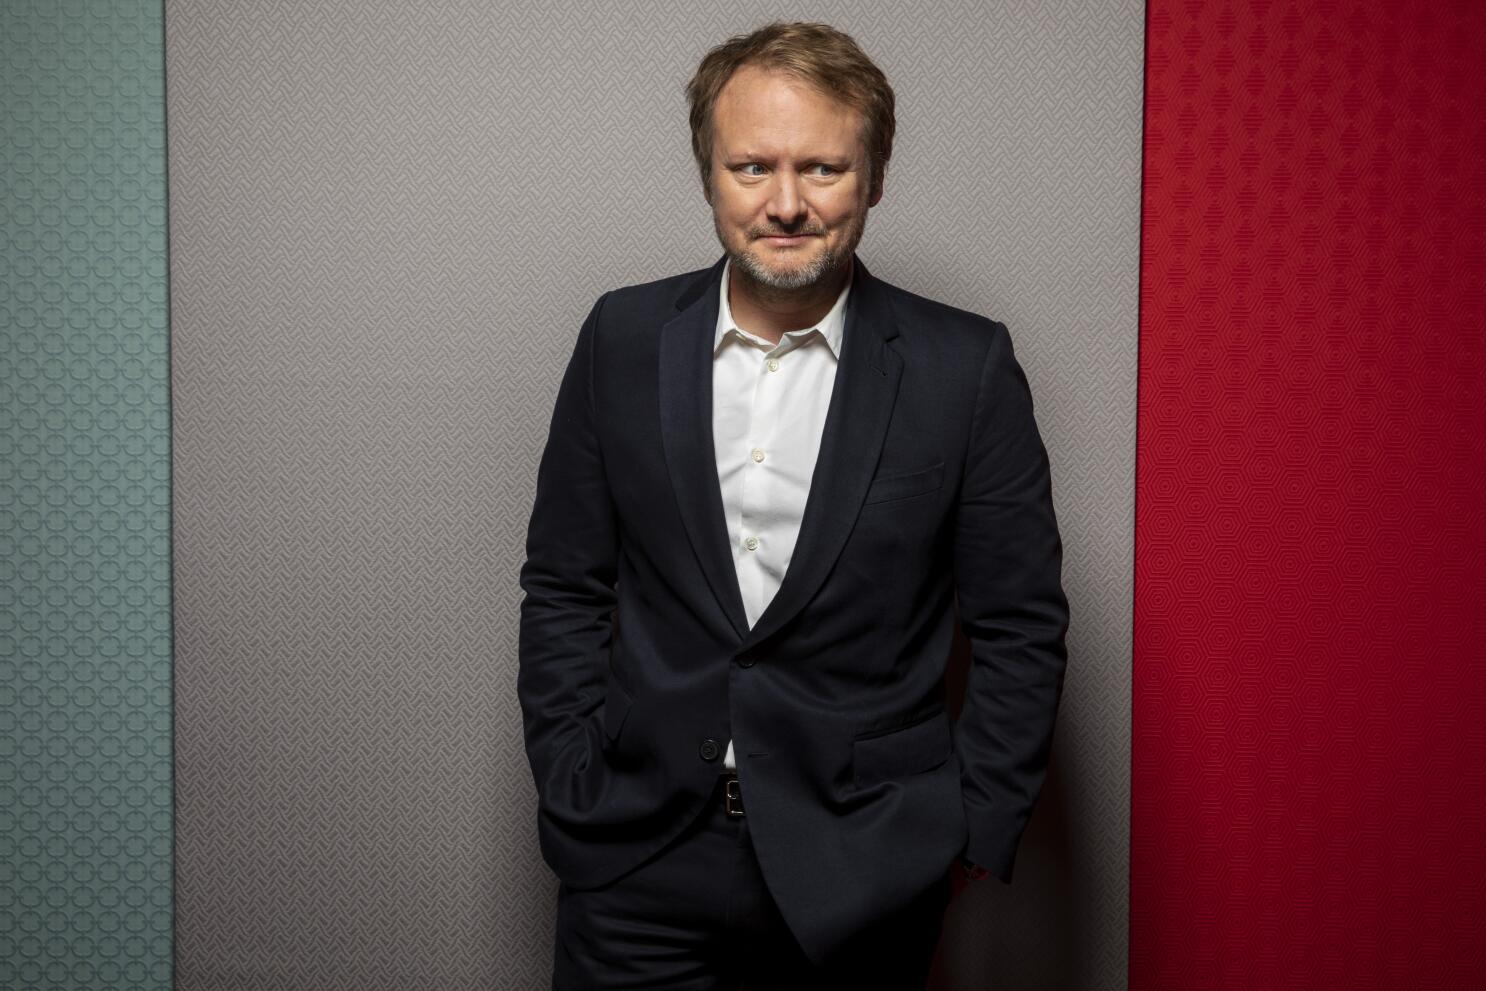 Rian Johnson: 'Trolling? I've had slightly more than most people